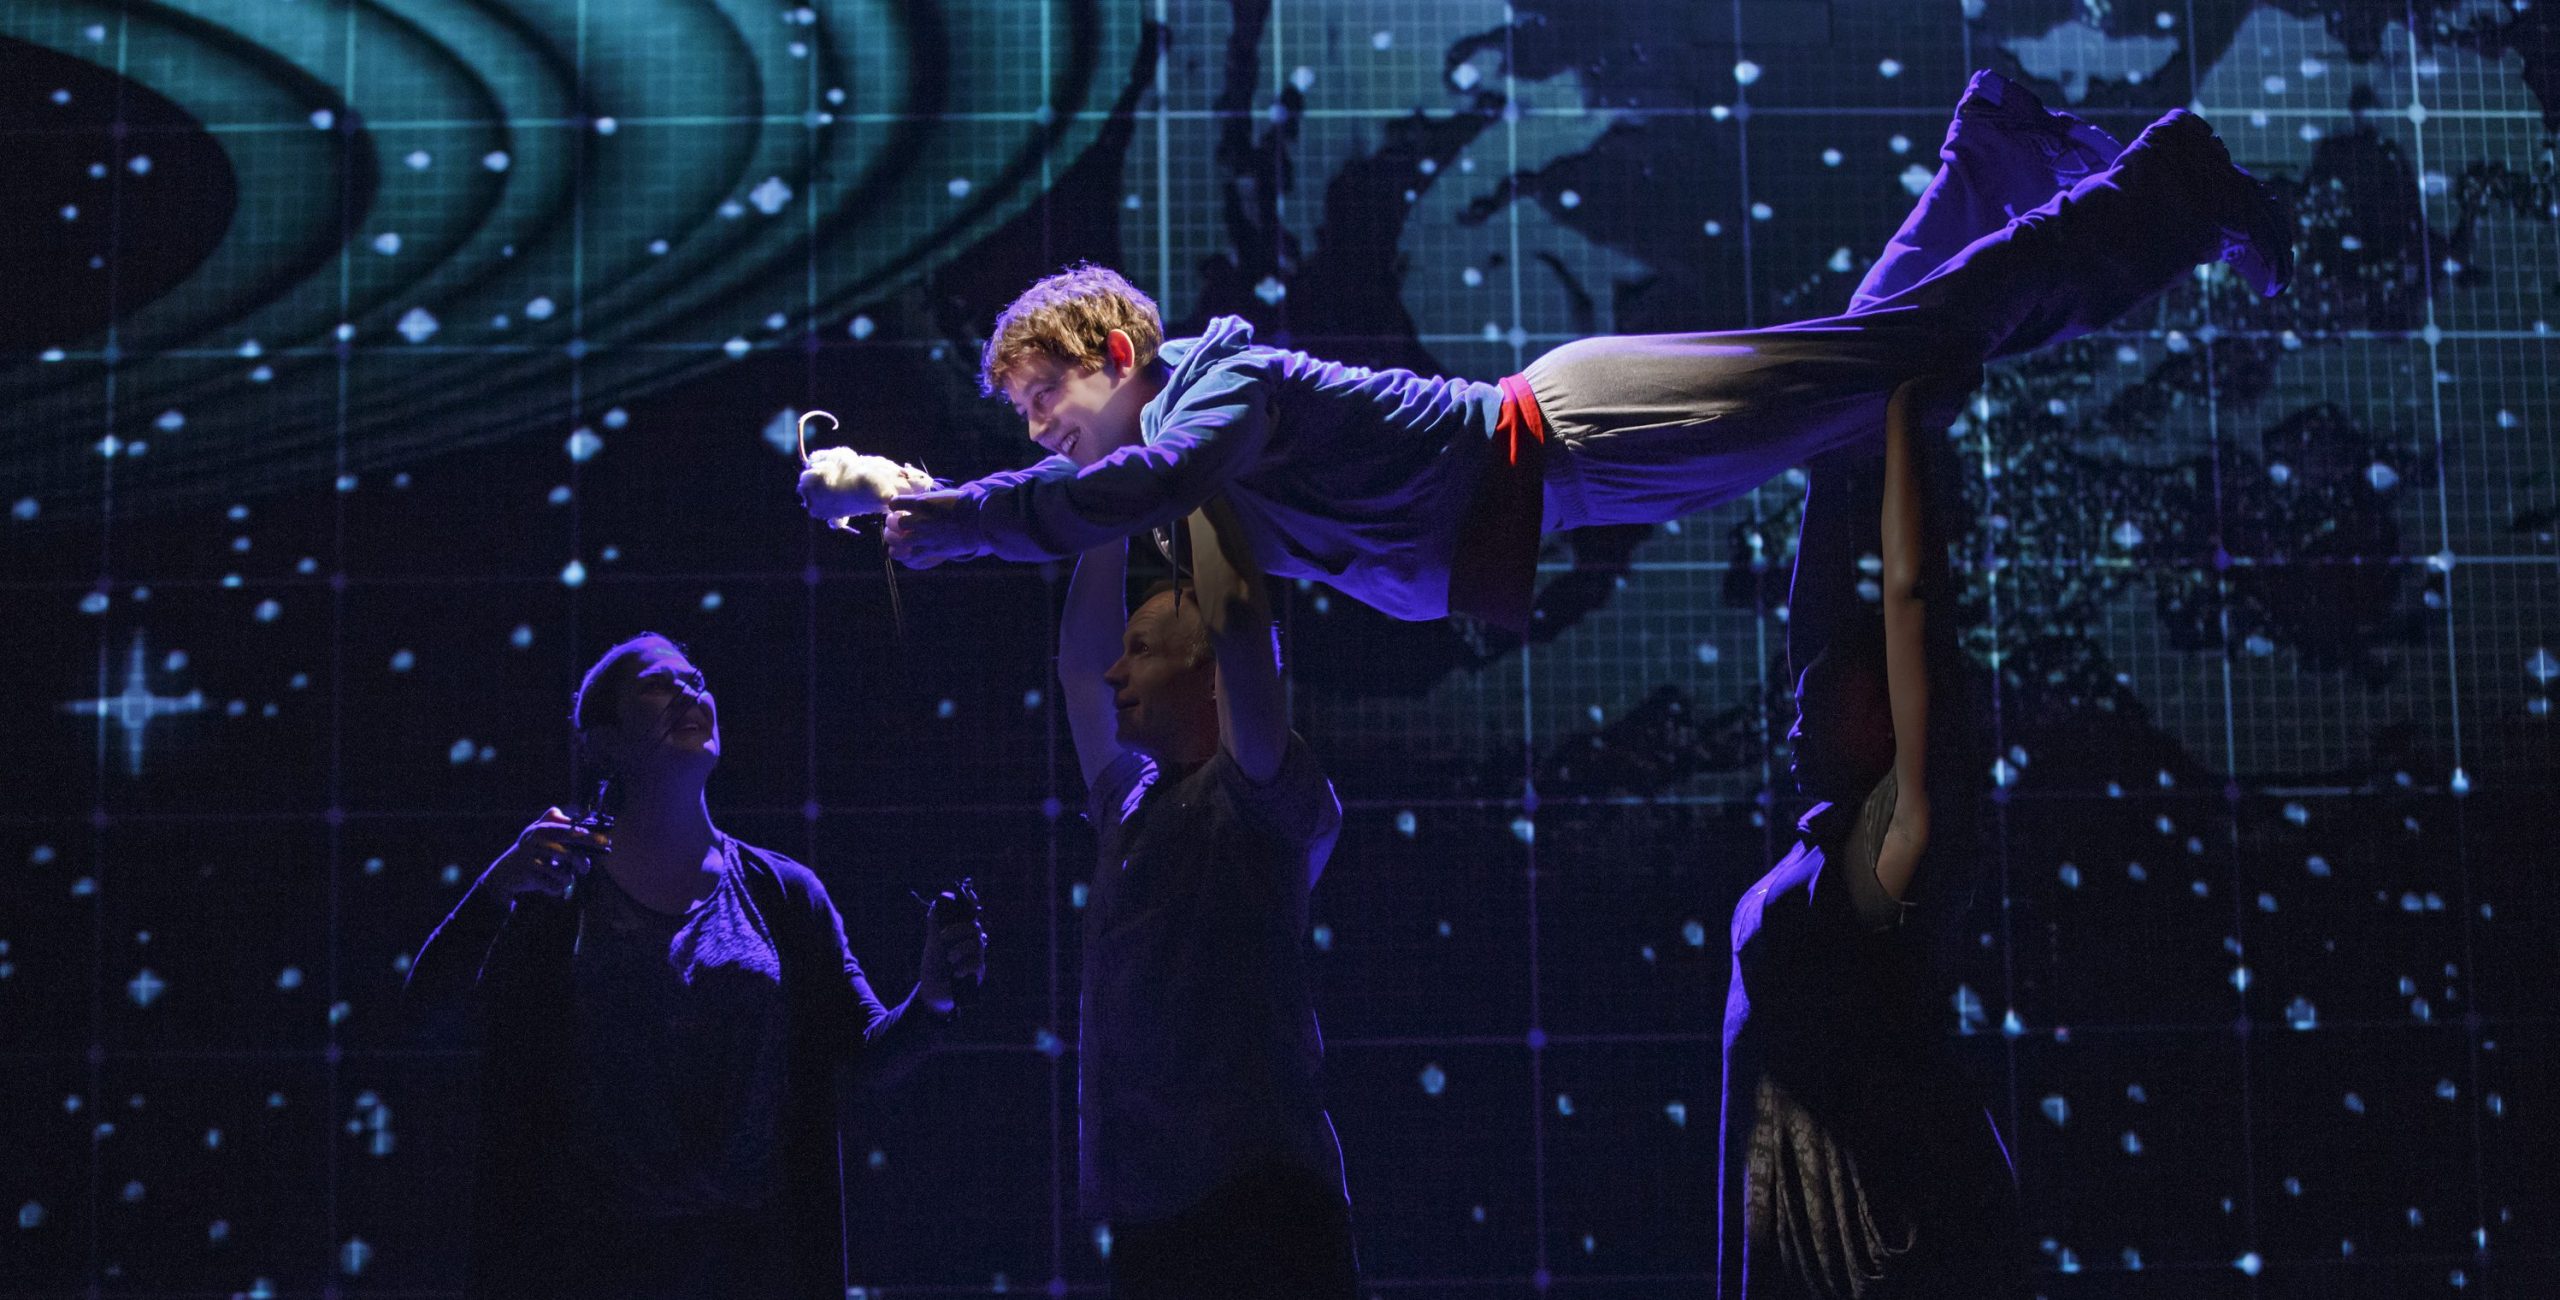 there's more than one curious incident in "The Curious Incident of the Dog in the Night-Time."